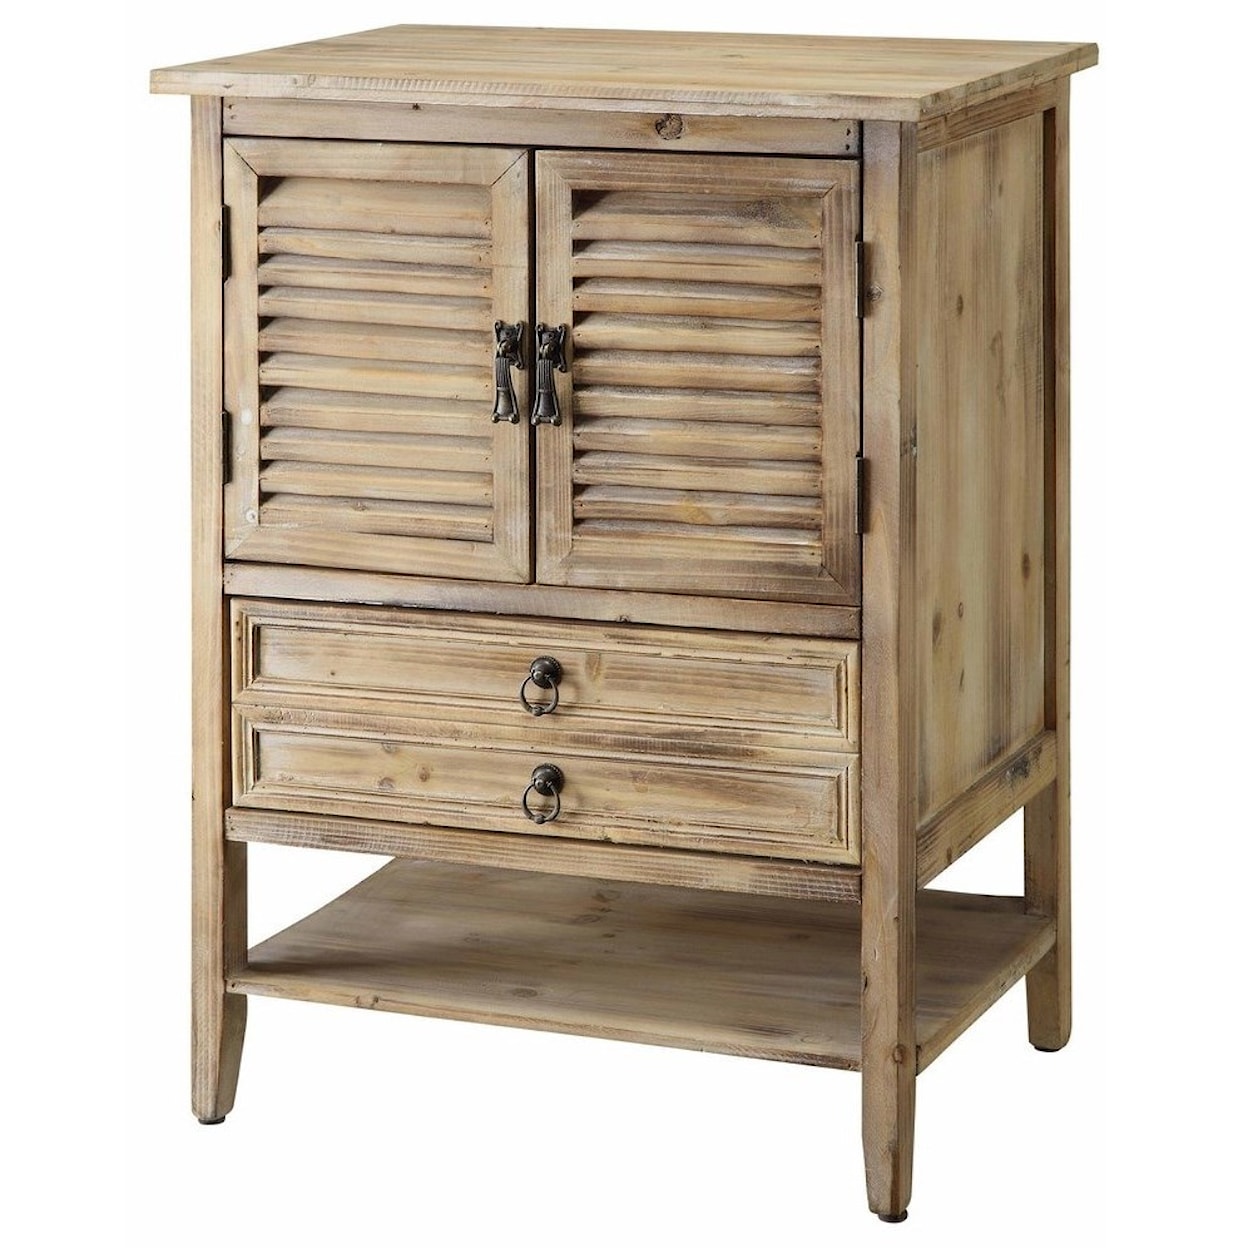 Crestview Collection Accent Furniture Jackson 2 Door Weathered Oak Bedside Accent